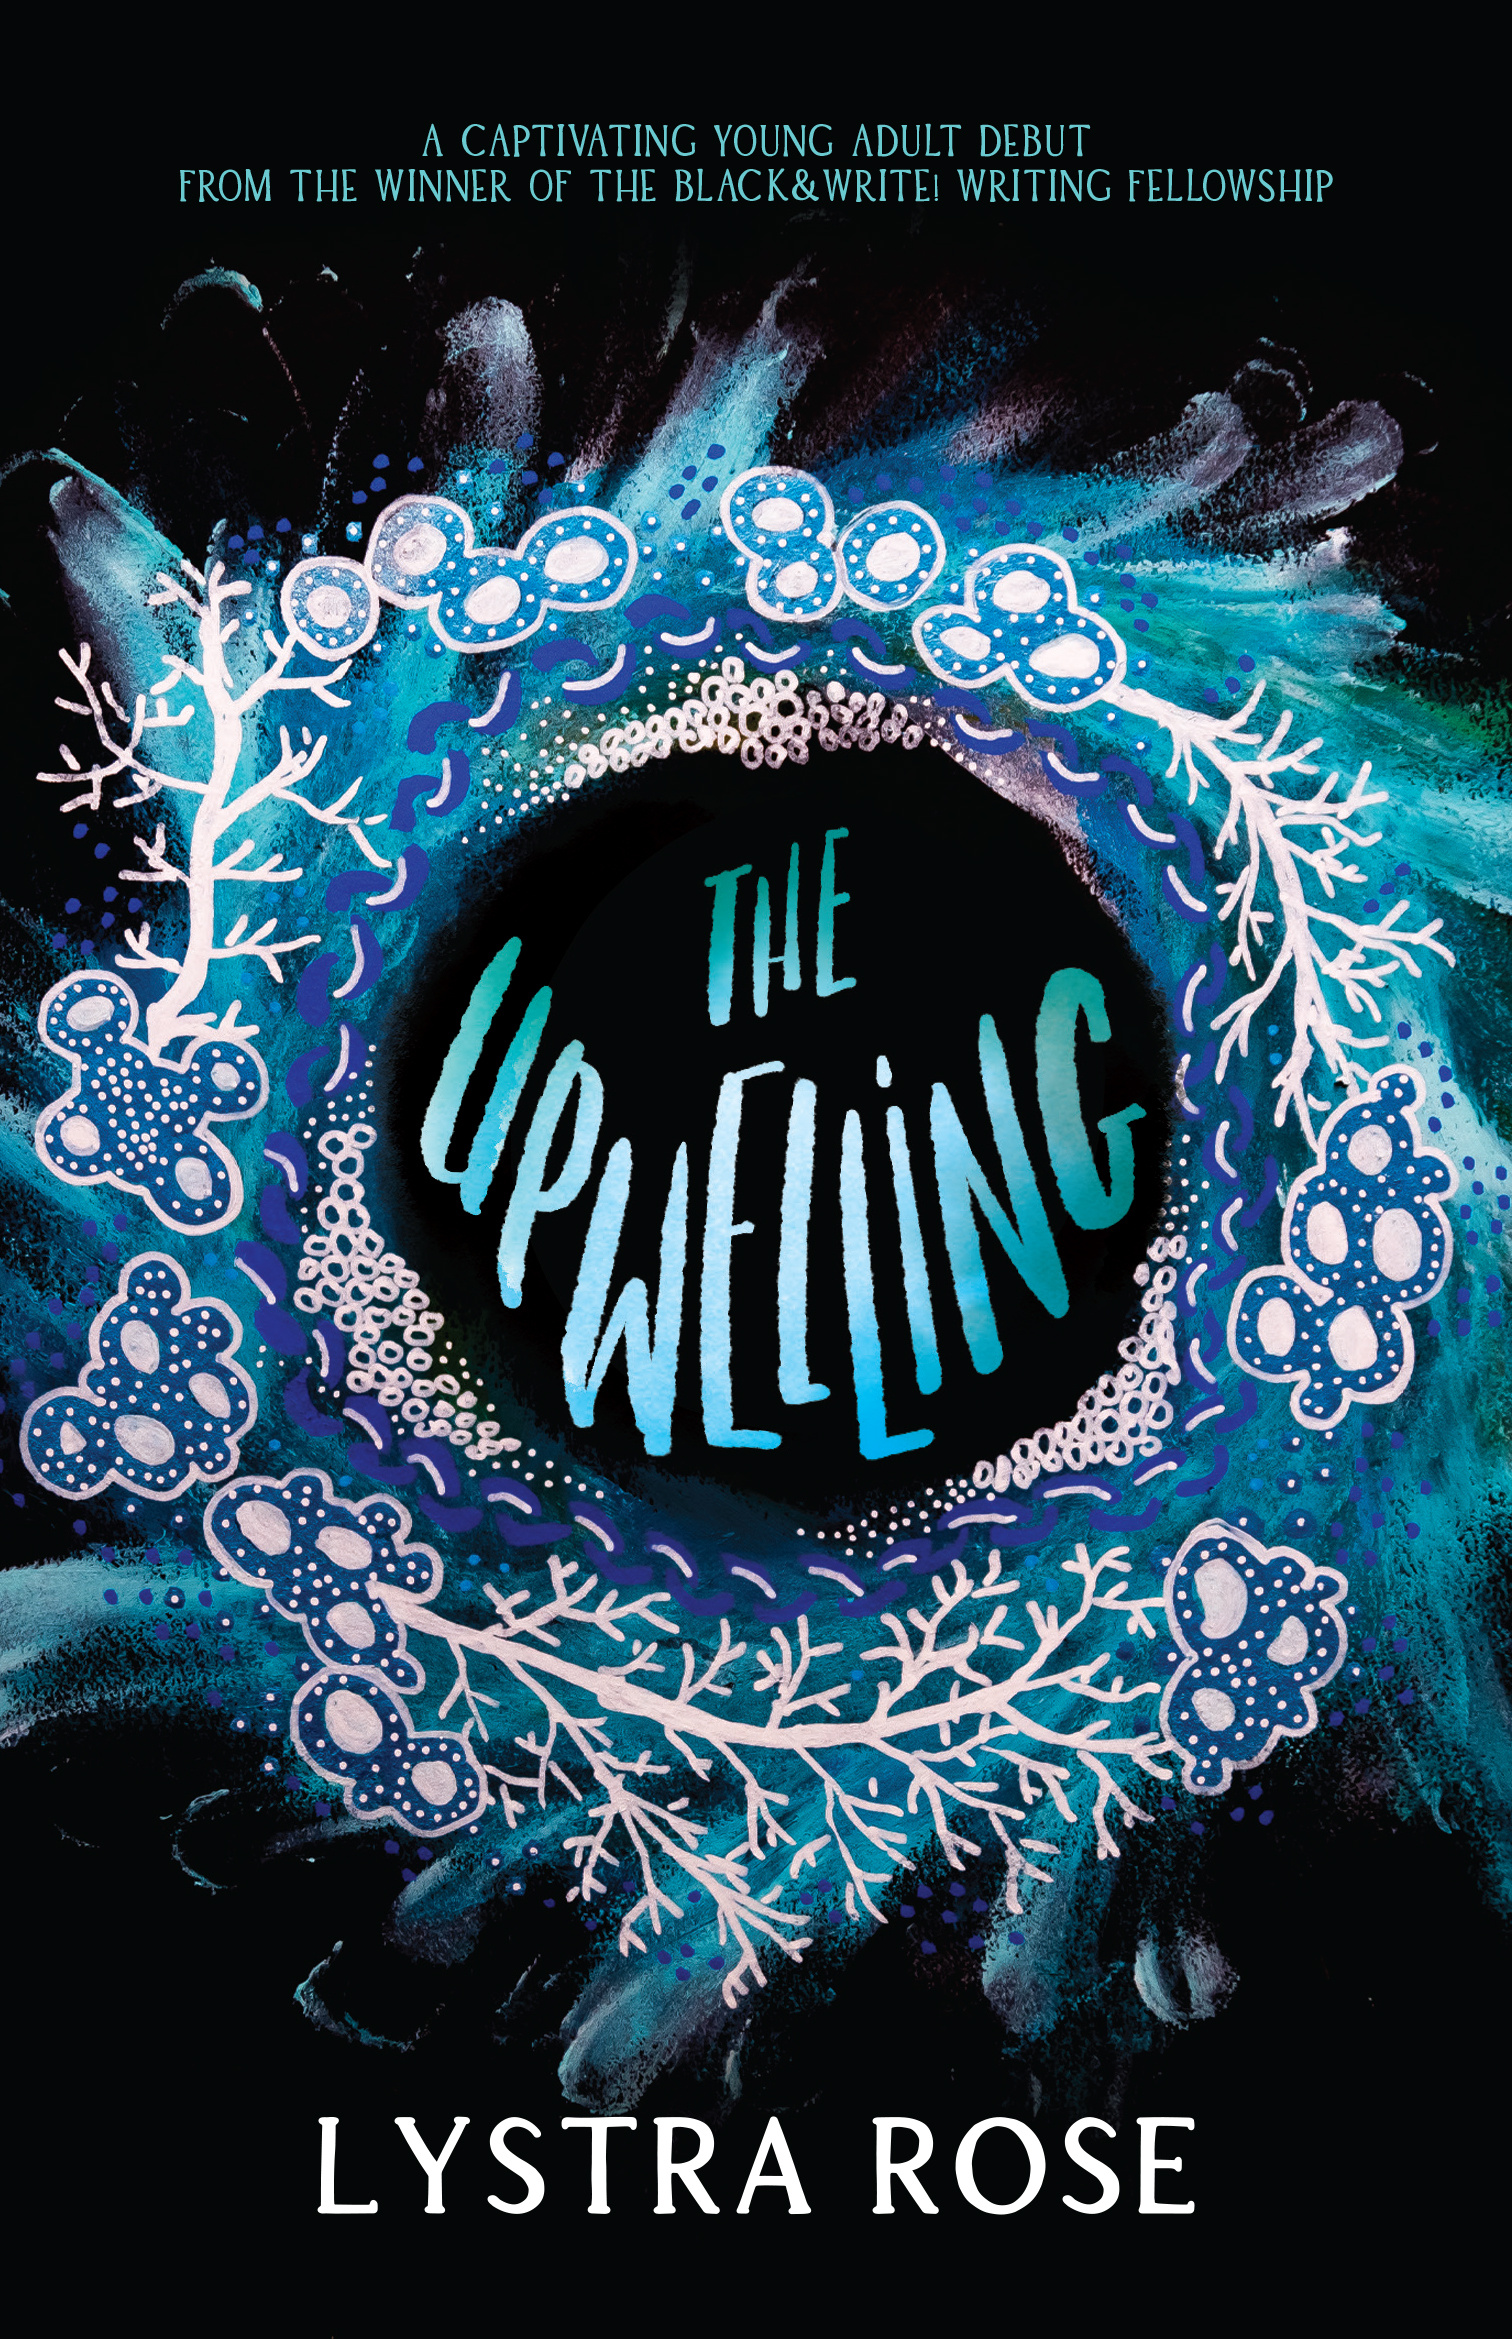 A black book cover with blue and white text. Text reads a captivating young adult debut from the winner of the black and write writing Fellowship. The Upwelling by Lystra Rose